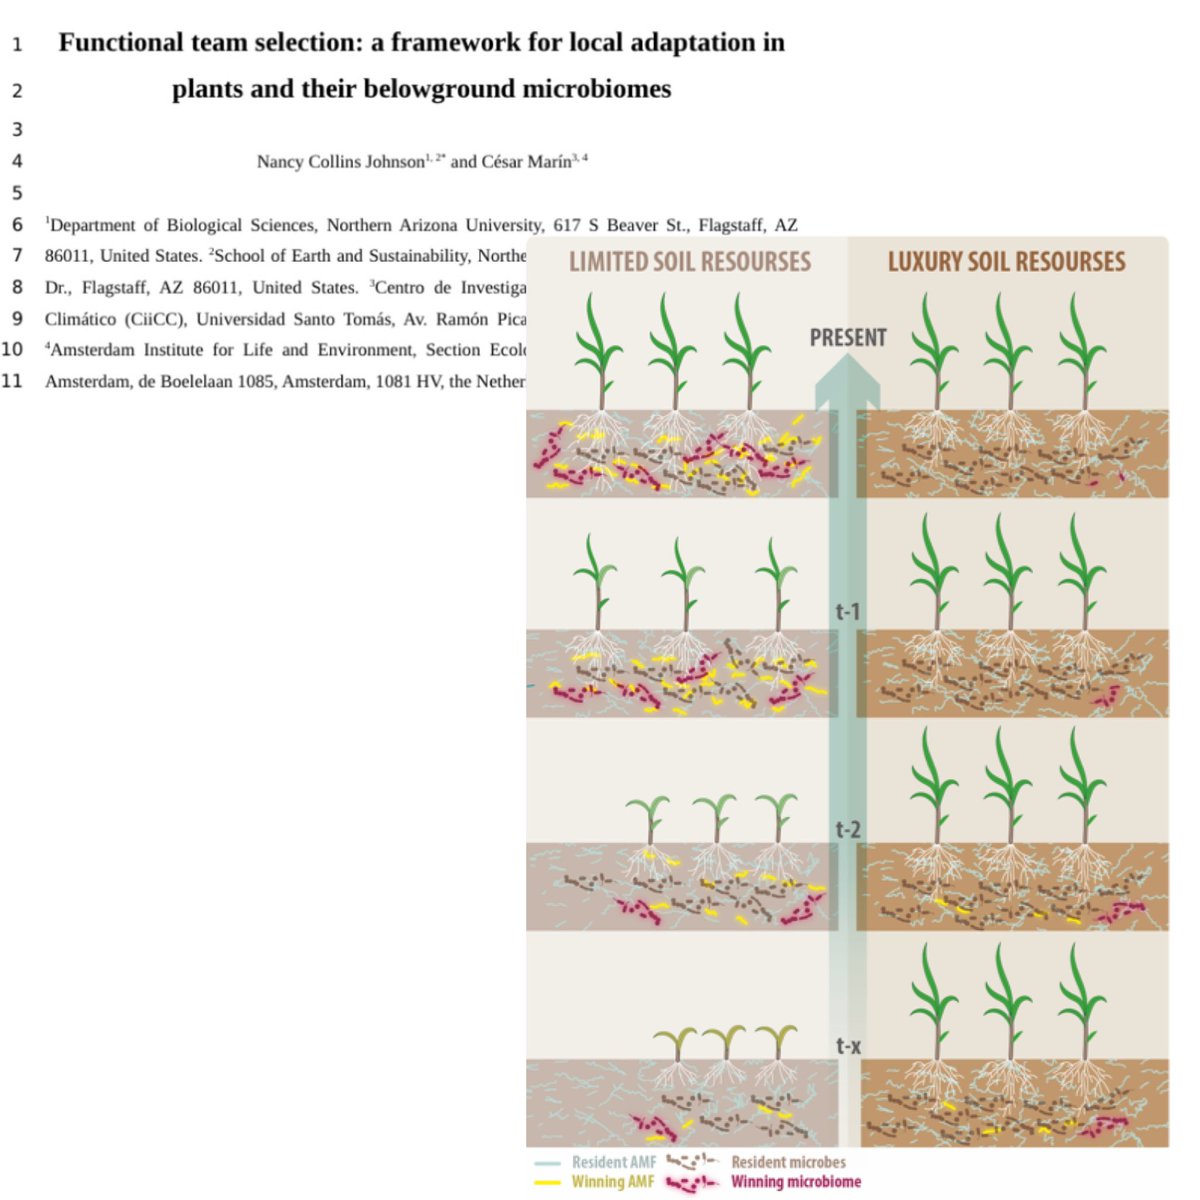 New #preprint out in @ecoevorxiv co-authored with Nancy Collins Johnson: “Functional team selection: a framework for local adaptation in plants and their belowground microbiome”.
#Mycorrhiza #Microbiome #Holobiont #ComplexAdaptiveSystems #Hyphosphere 

doi.org/10.32942/X27G91